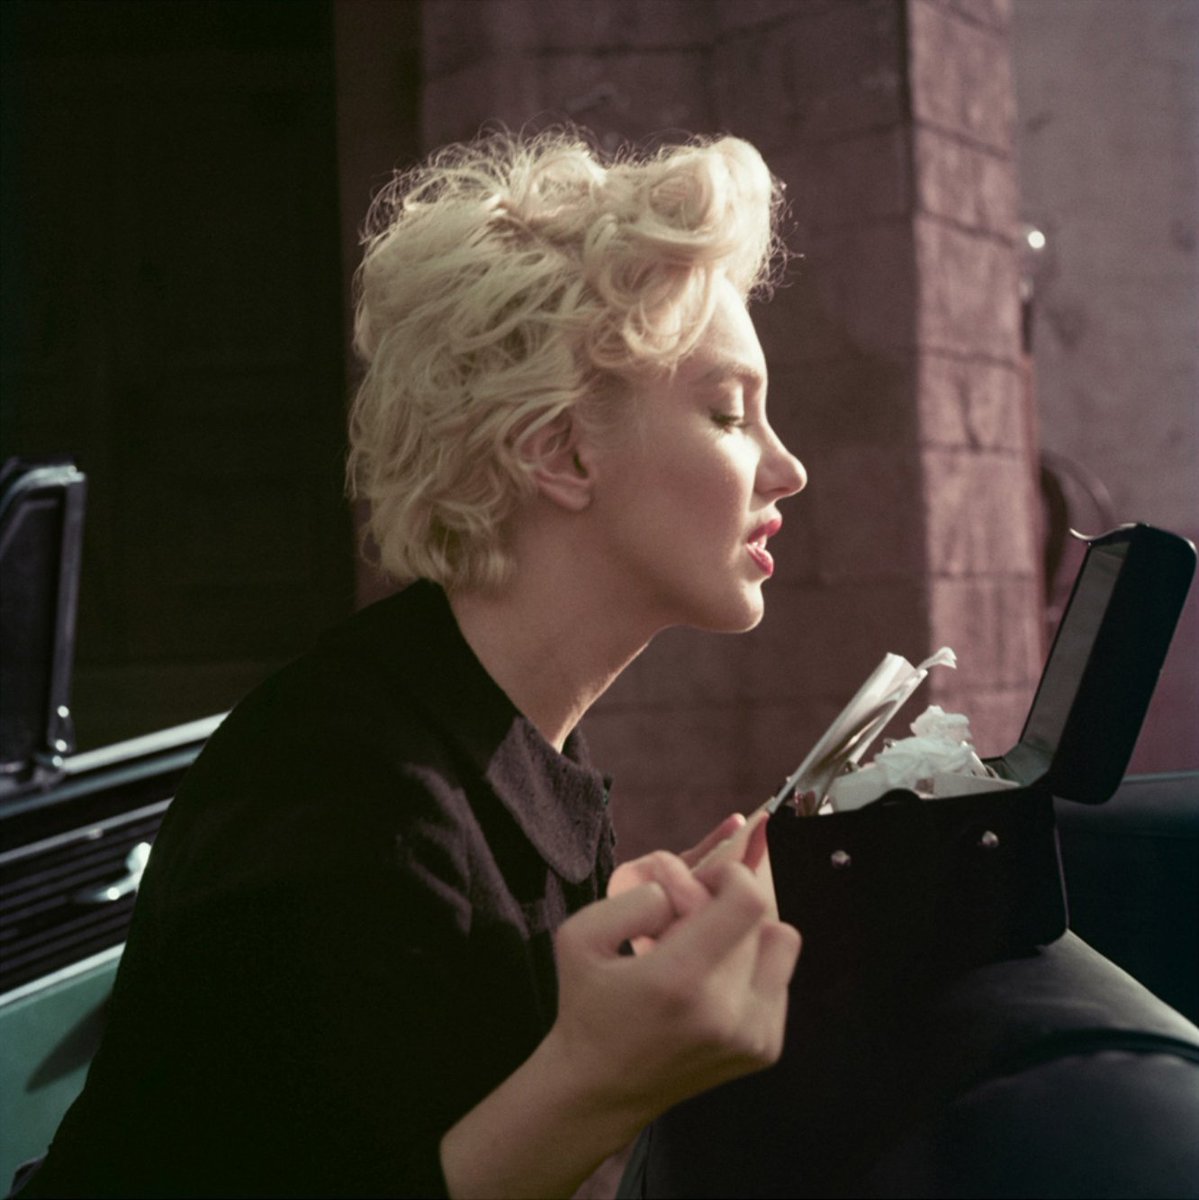 Marilyn Monroe | “Peasant Sitting” | Milton H. Greene | May 1954 “Rifling through the 20th Century Fox prop closet during one of those glorious Sunday afternoons on the studio backlots, Milton and Marilyn photographed the “Peasant Sitting”. Taken on May 24, 1954, this series was…